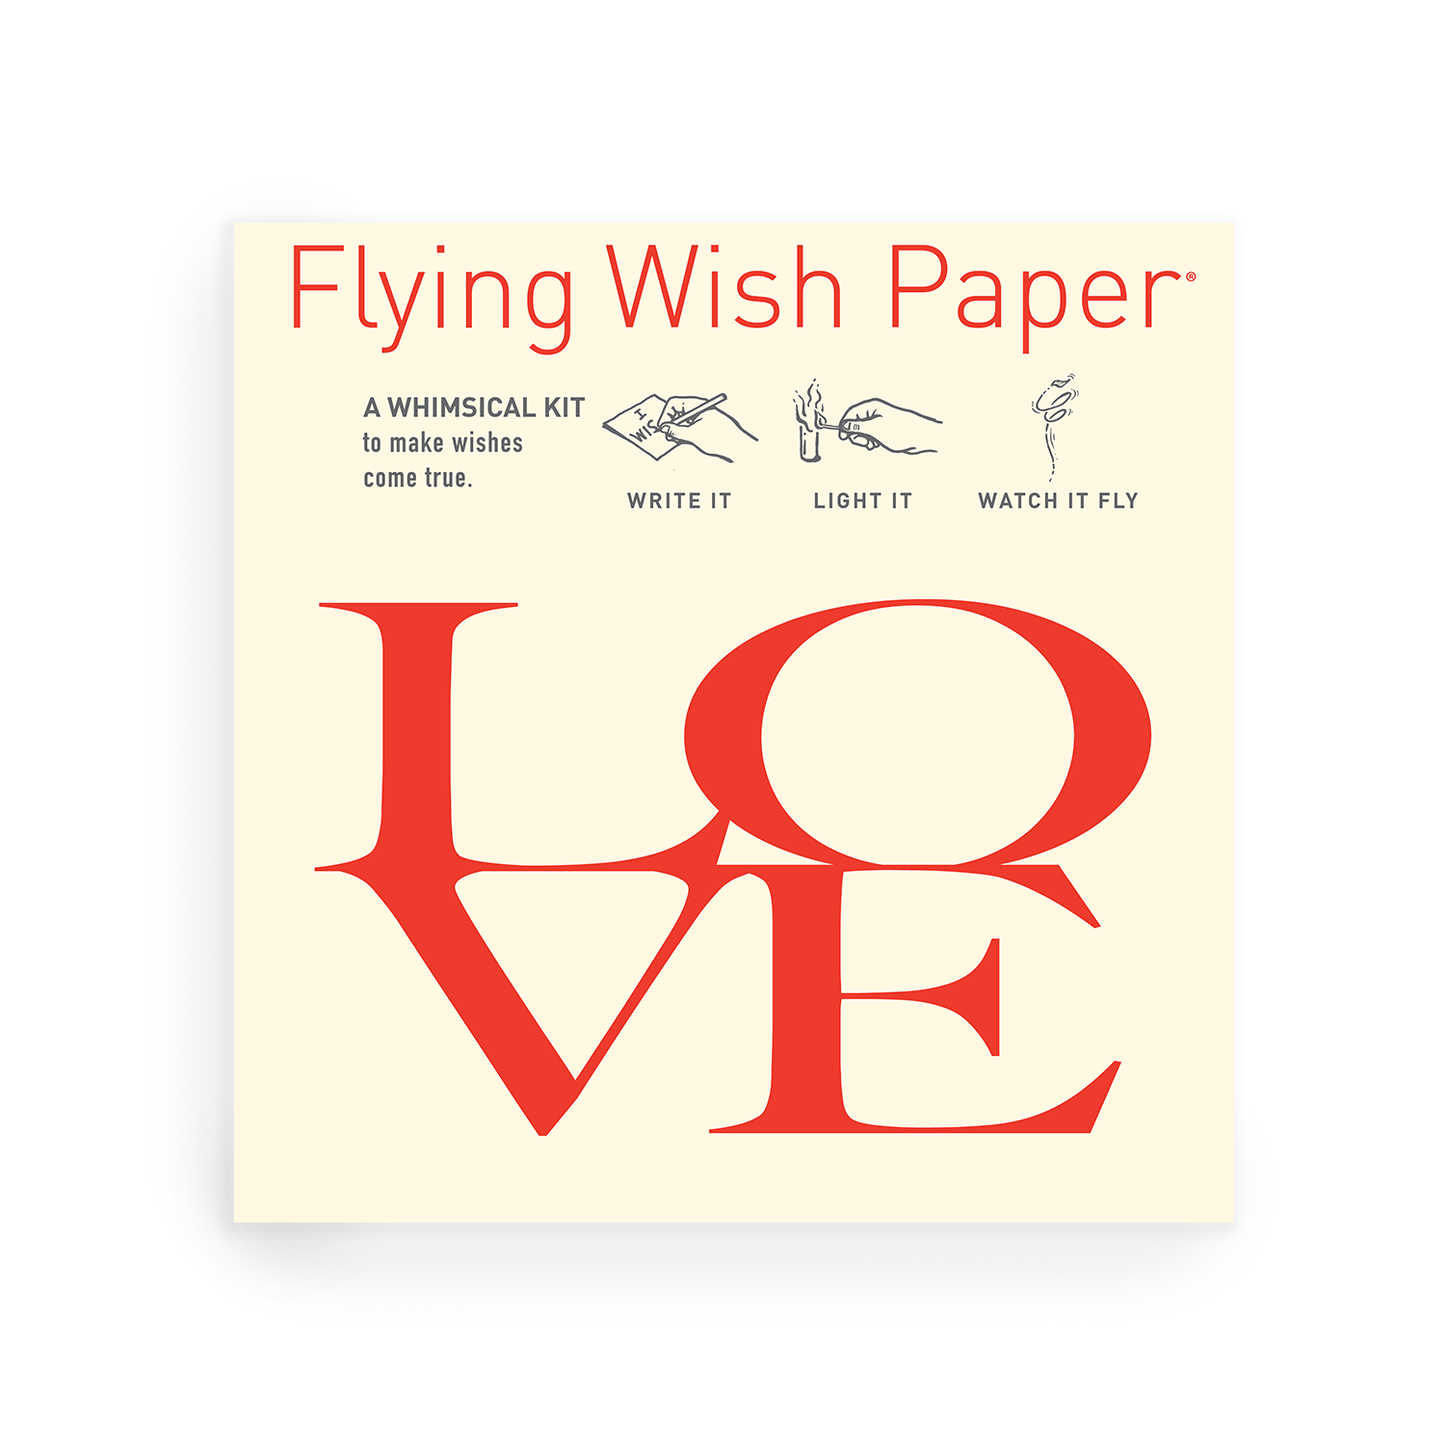 LOVE LETTERS / Mini wishing kit with 15 Wishes + accessories